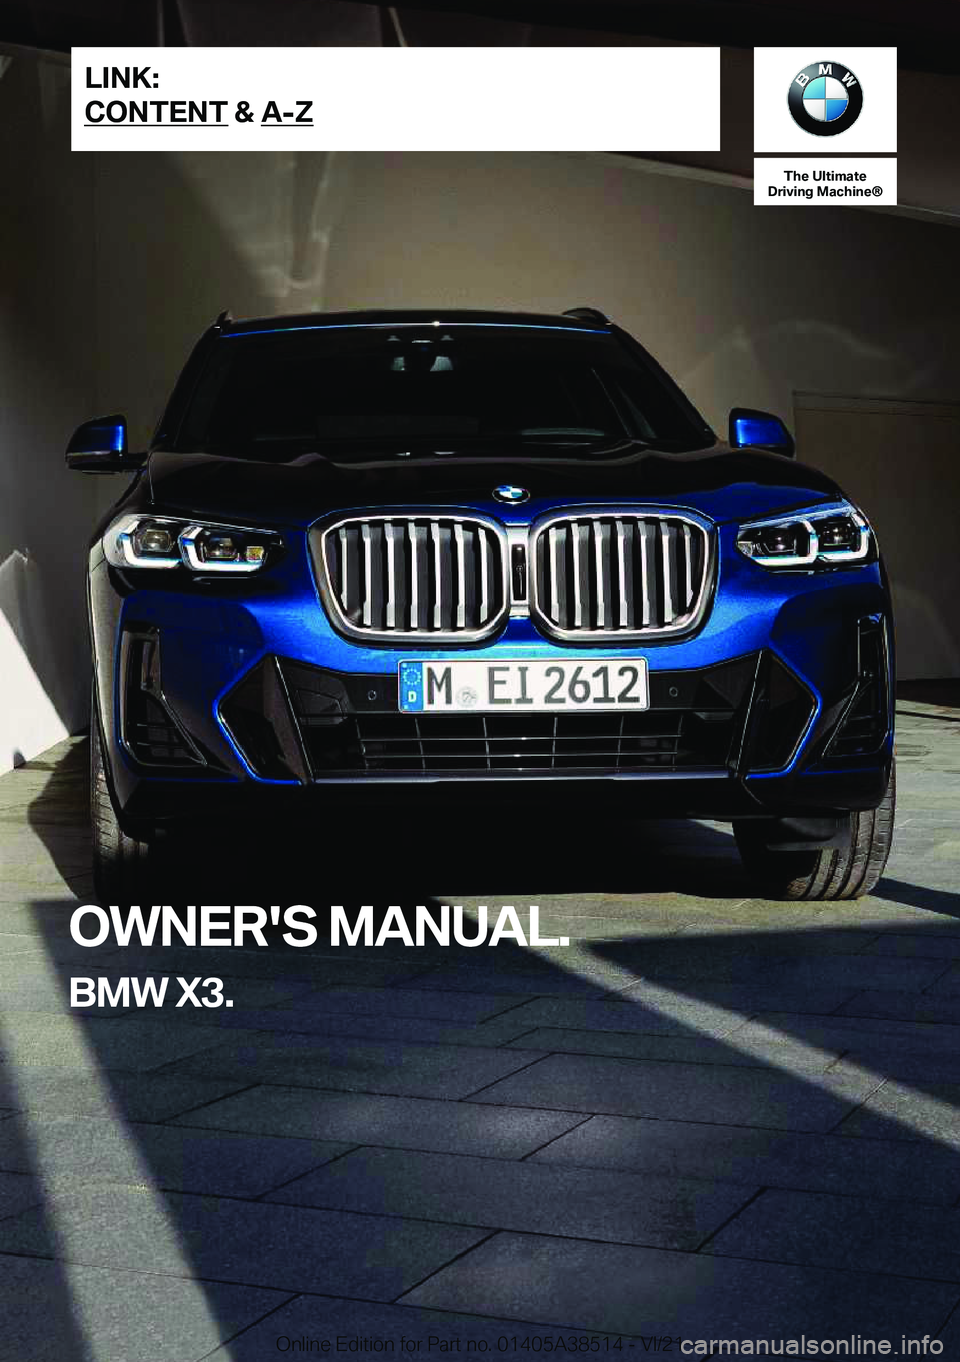 BMW X3 2022  Owners Manual �T�h�e��U�l�t�i�m�a�t�e
�D�r�i�v�i�n�g��M�a�c�h�i�n�e�n
�O�W�N�E�R�'�S��M�A�N�U�A�L�.
�B�M�W��X�3�.�L�I�N�K�:
�C�O�N�T�E�N�T��&��A�-�Z�O�n�l�i�n�e��E�d�i�t�i�o�n��f�o�r��P�a�r�t��n�o�.�